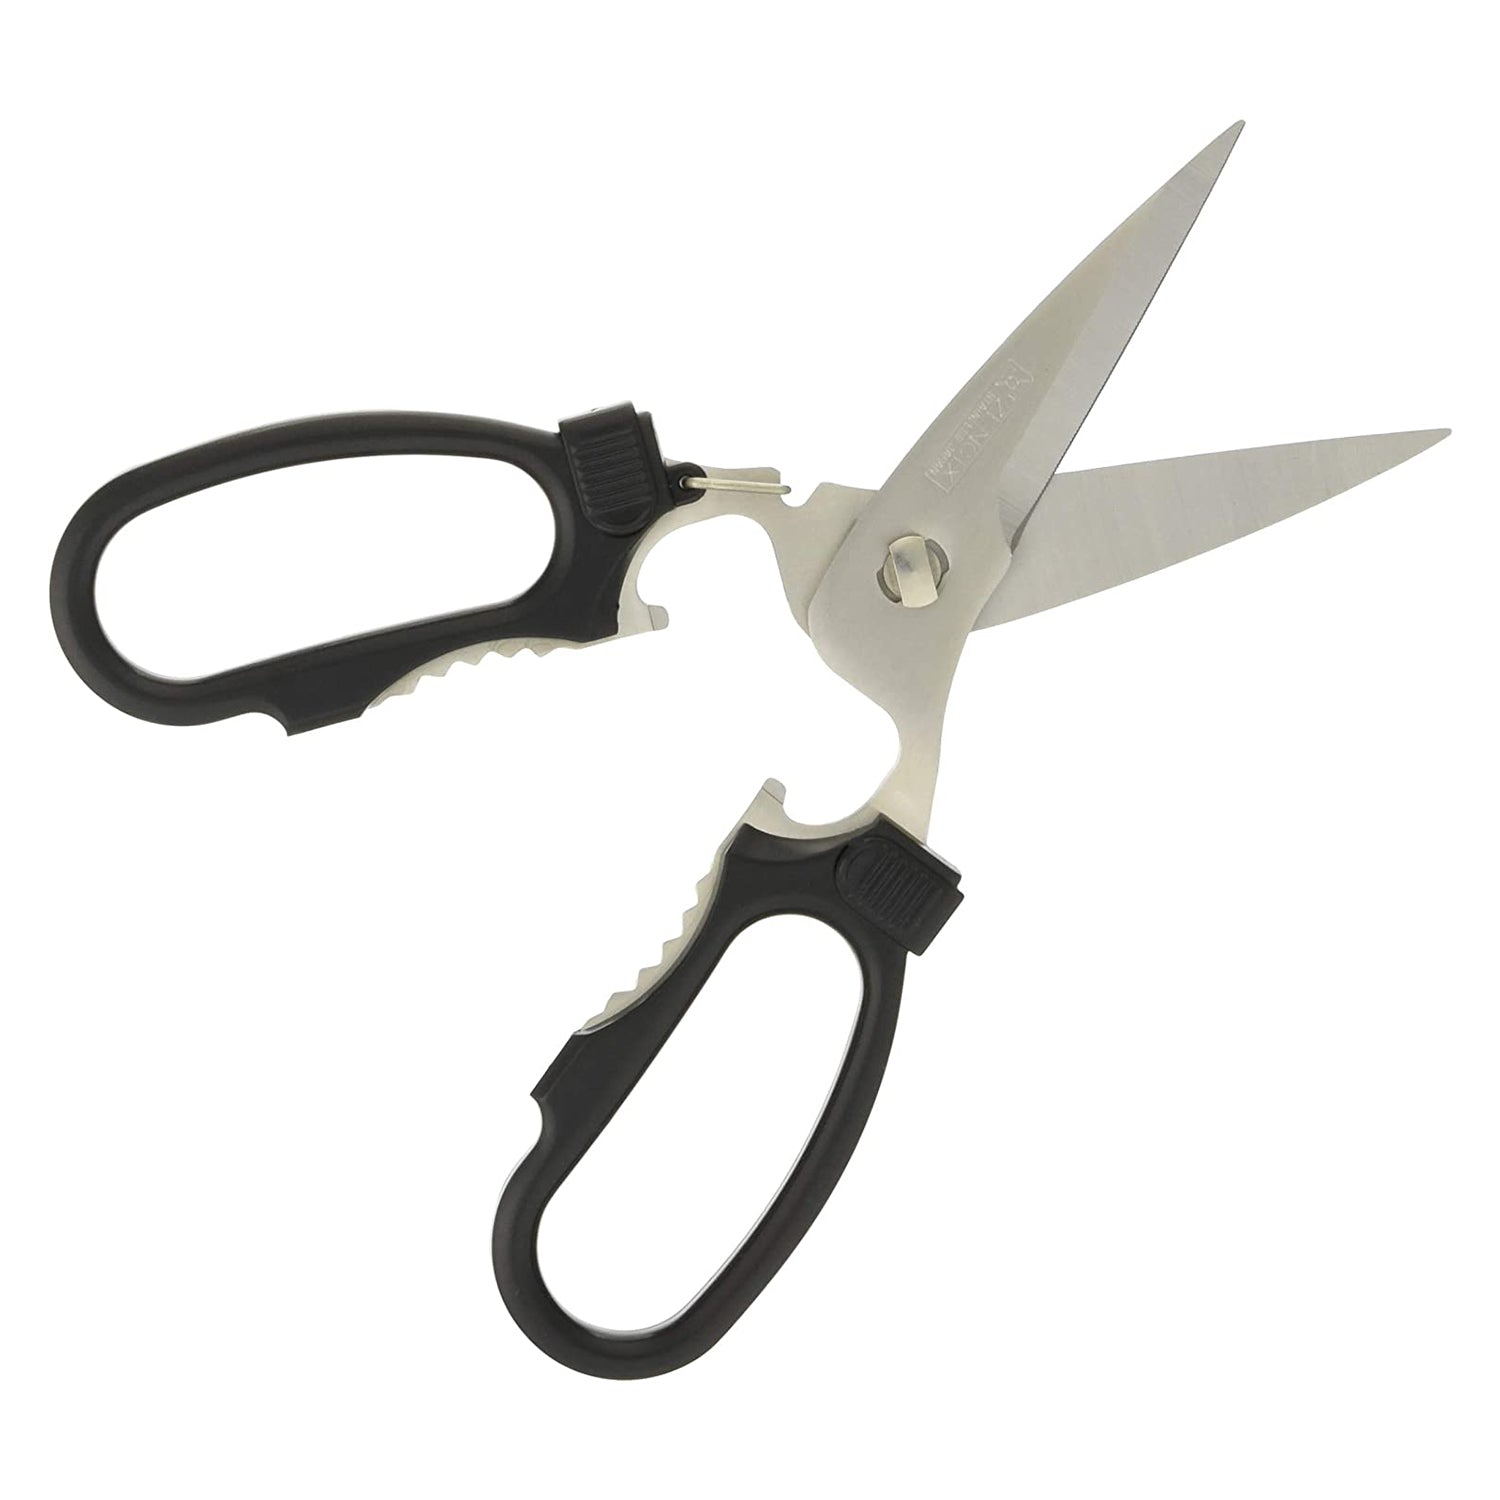 CANARY All Purpose Industrial Scissors with Cover 6.5 [Straight Blade],  Made in JAPAN, Heavy Duty Razor Sharp Japanese Stainless Steel Blade, Black